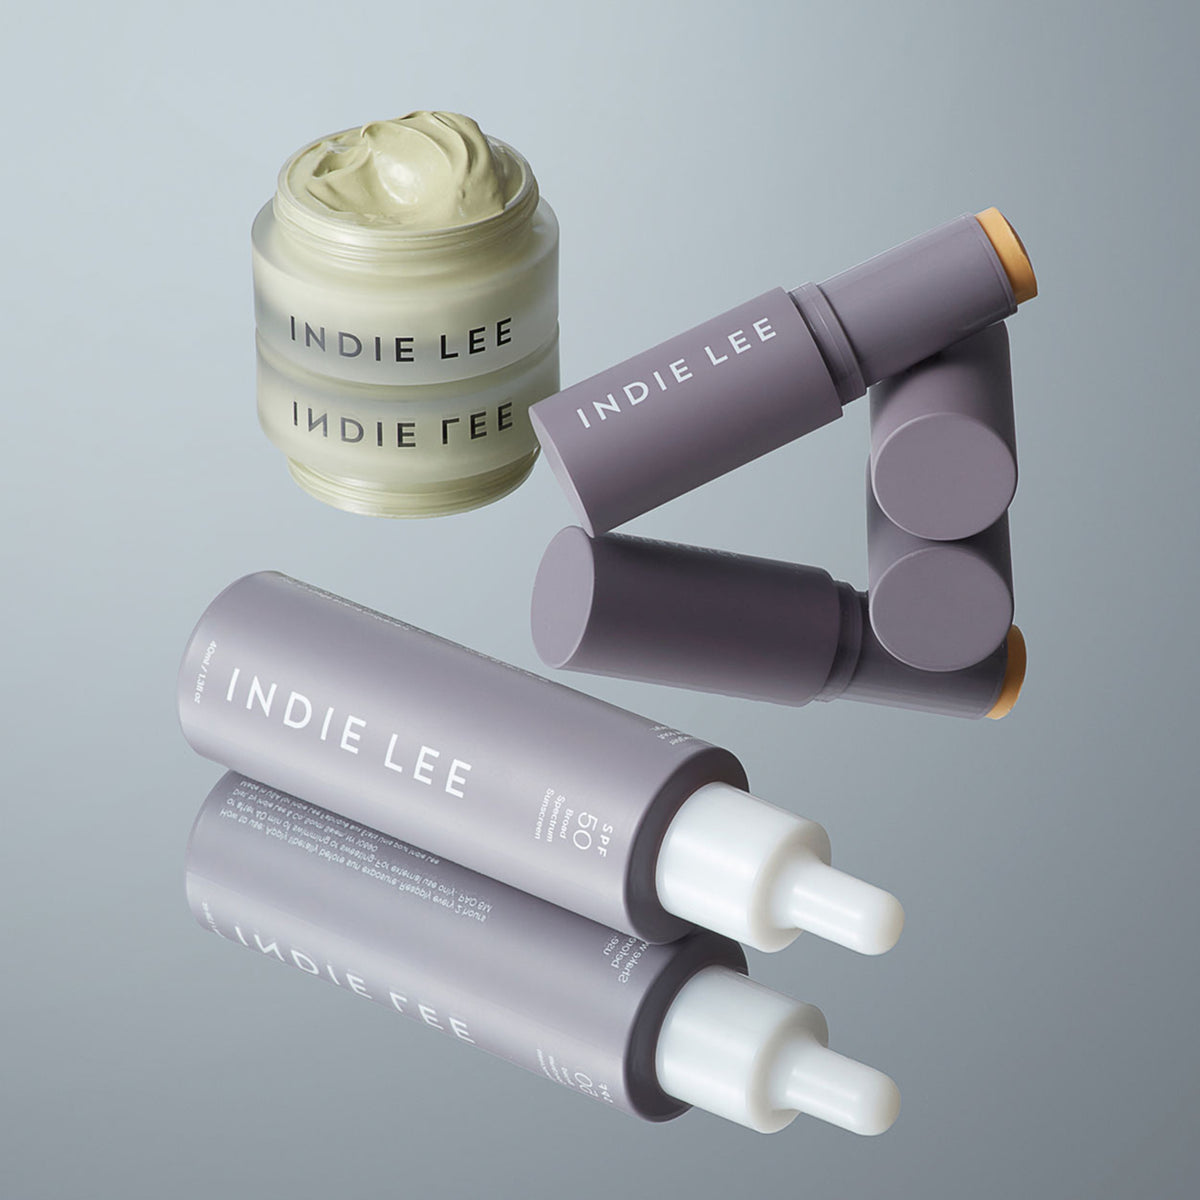 Indie Lee Daily SPF 50 Primer . This product is for light and medium and deep complexions